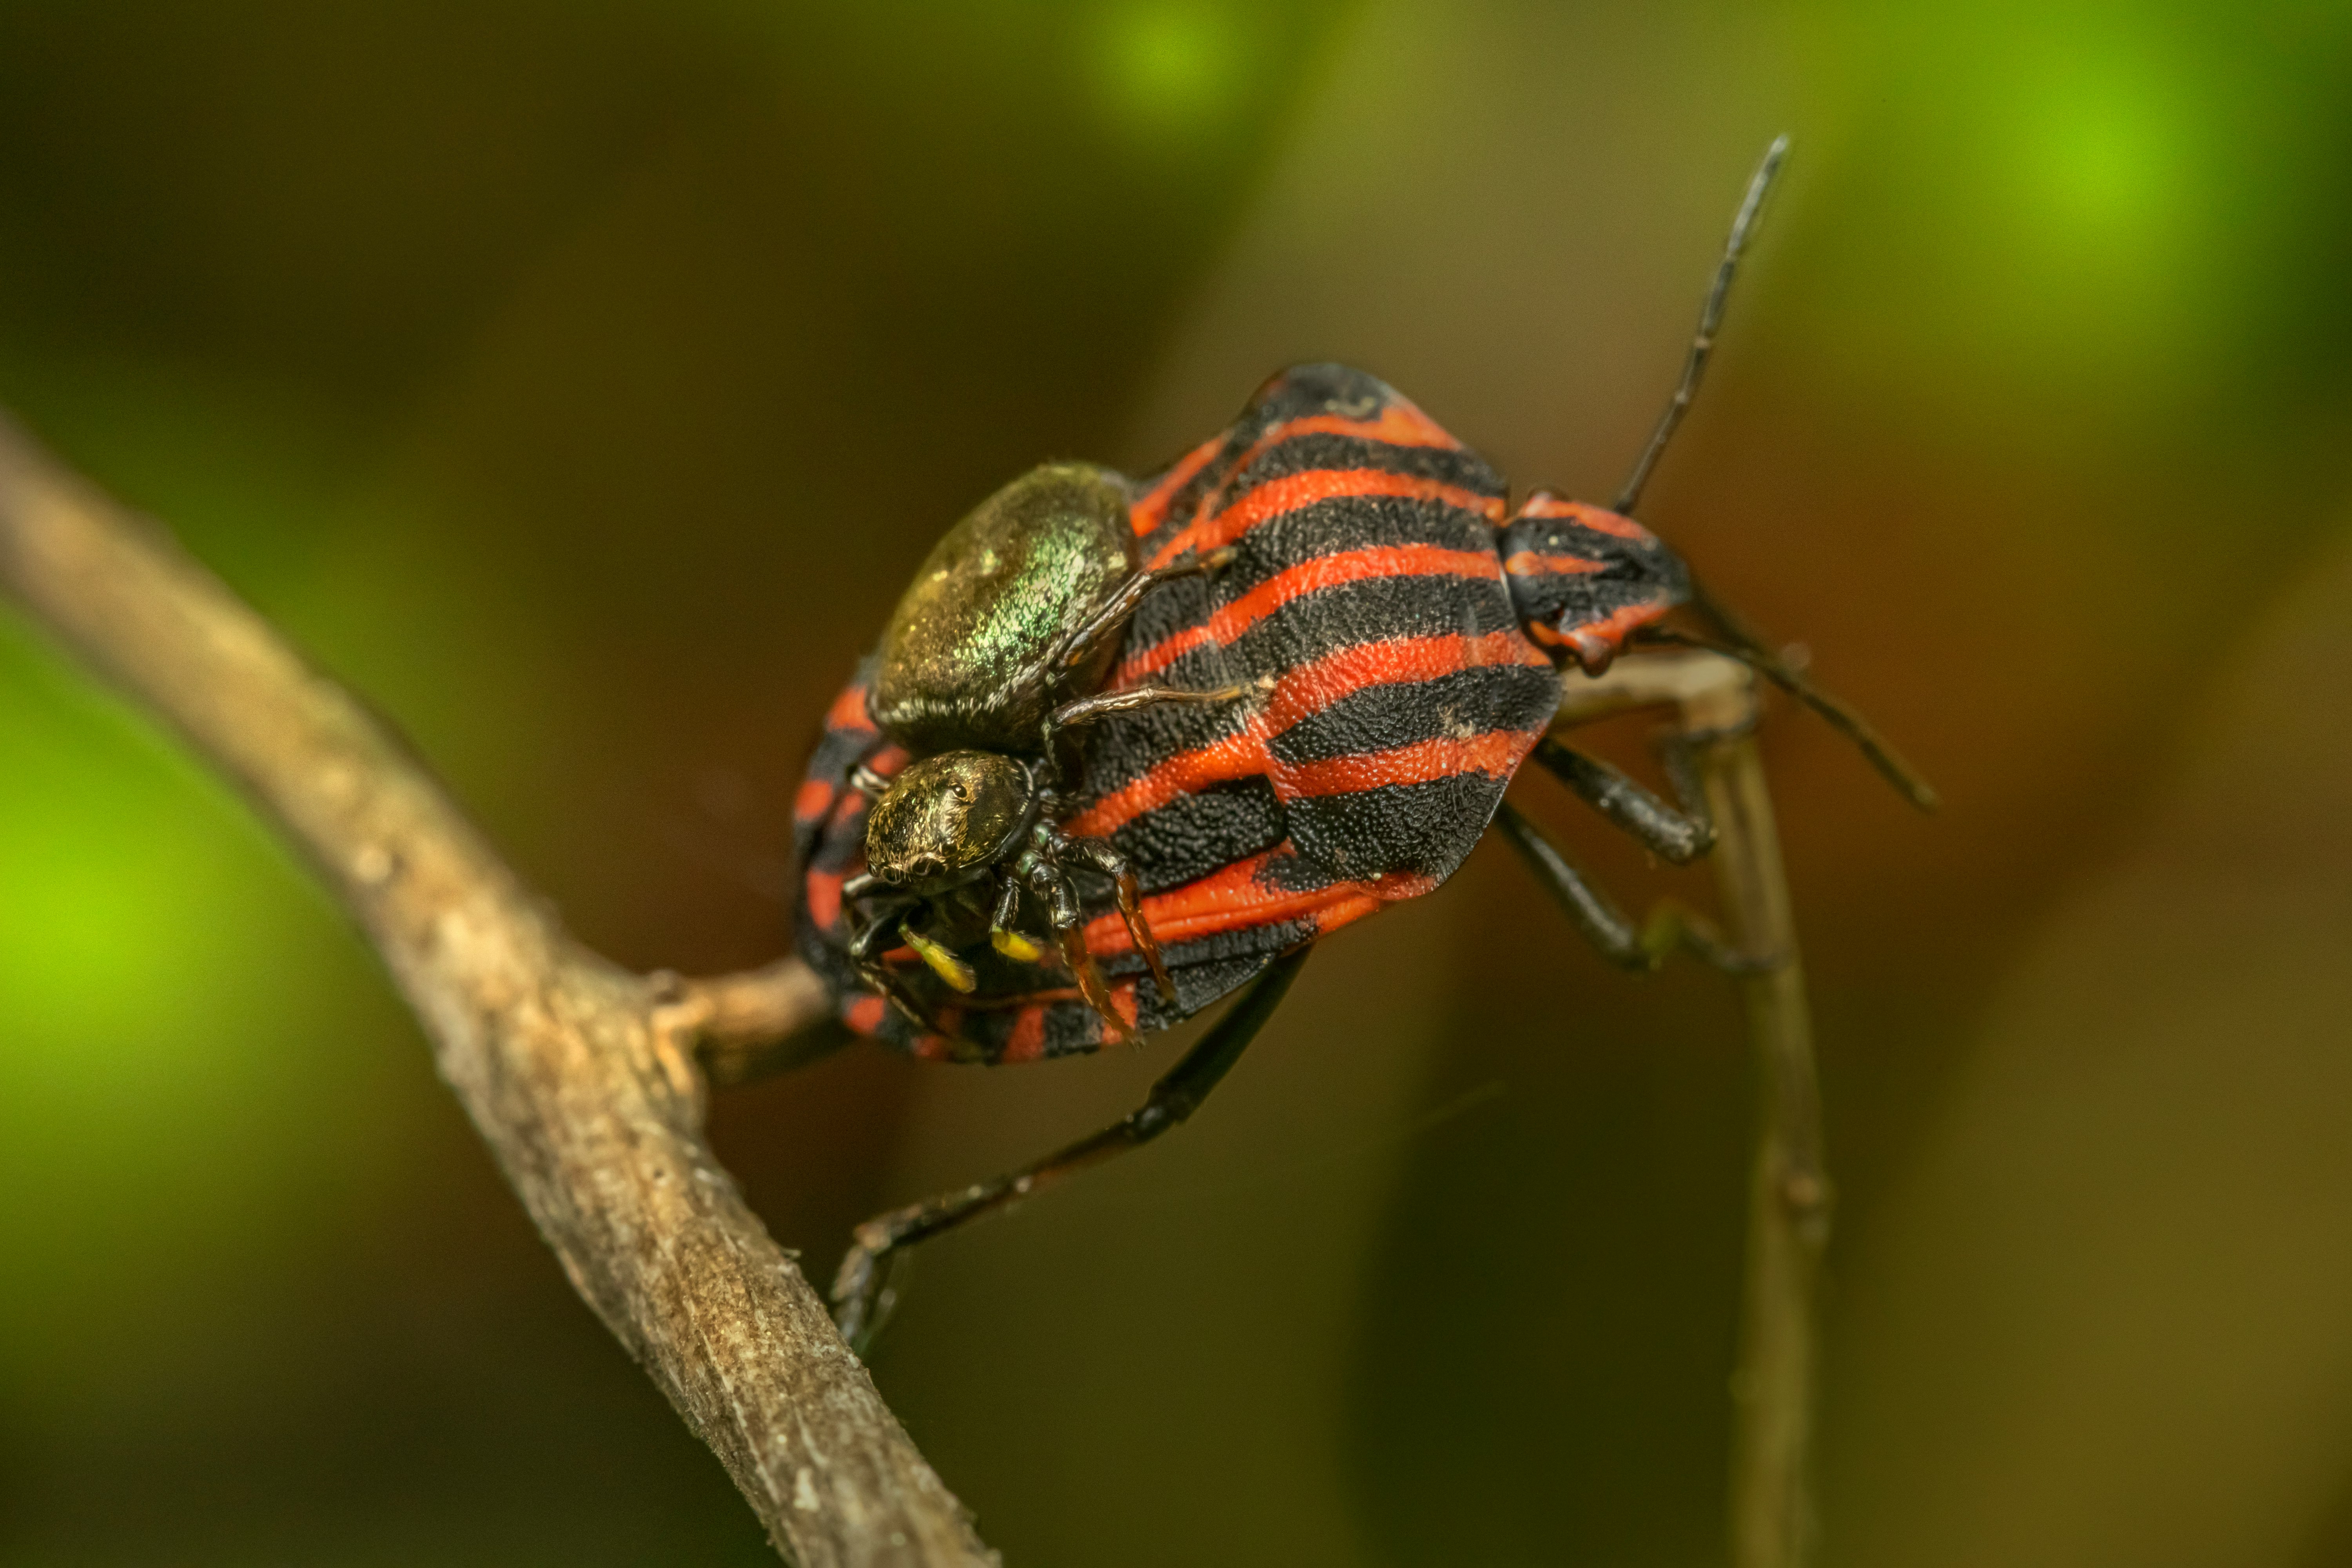 red and black striped beetle perched on brown stem in close up photography during daytime